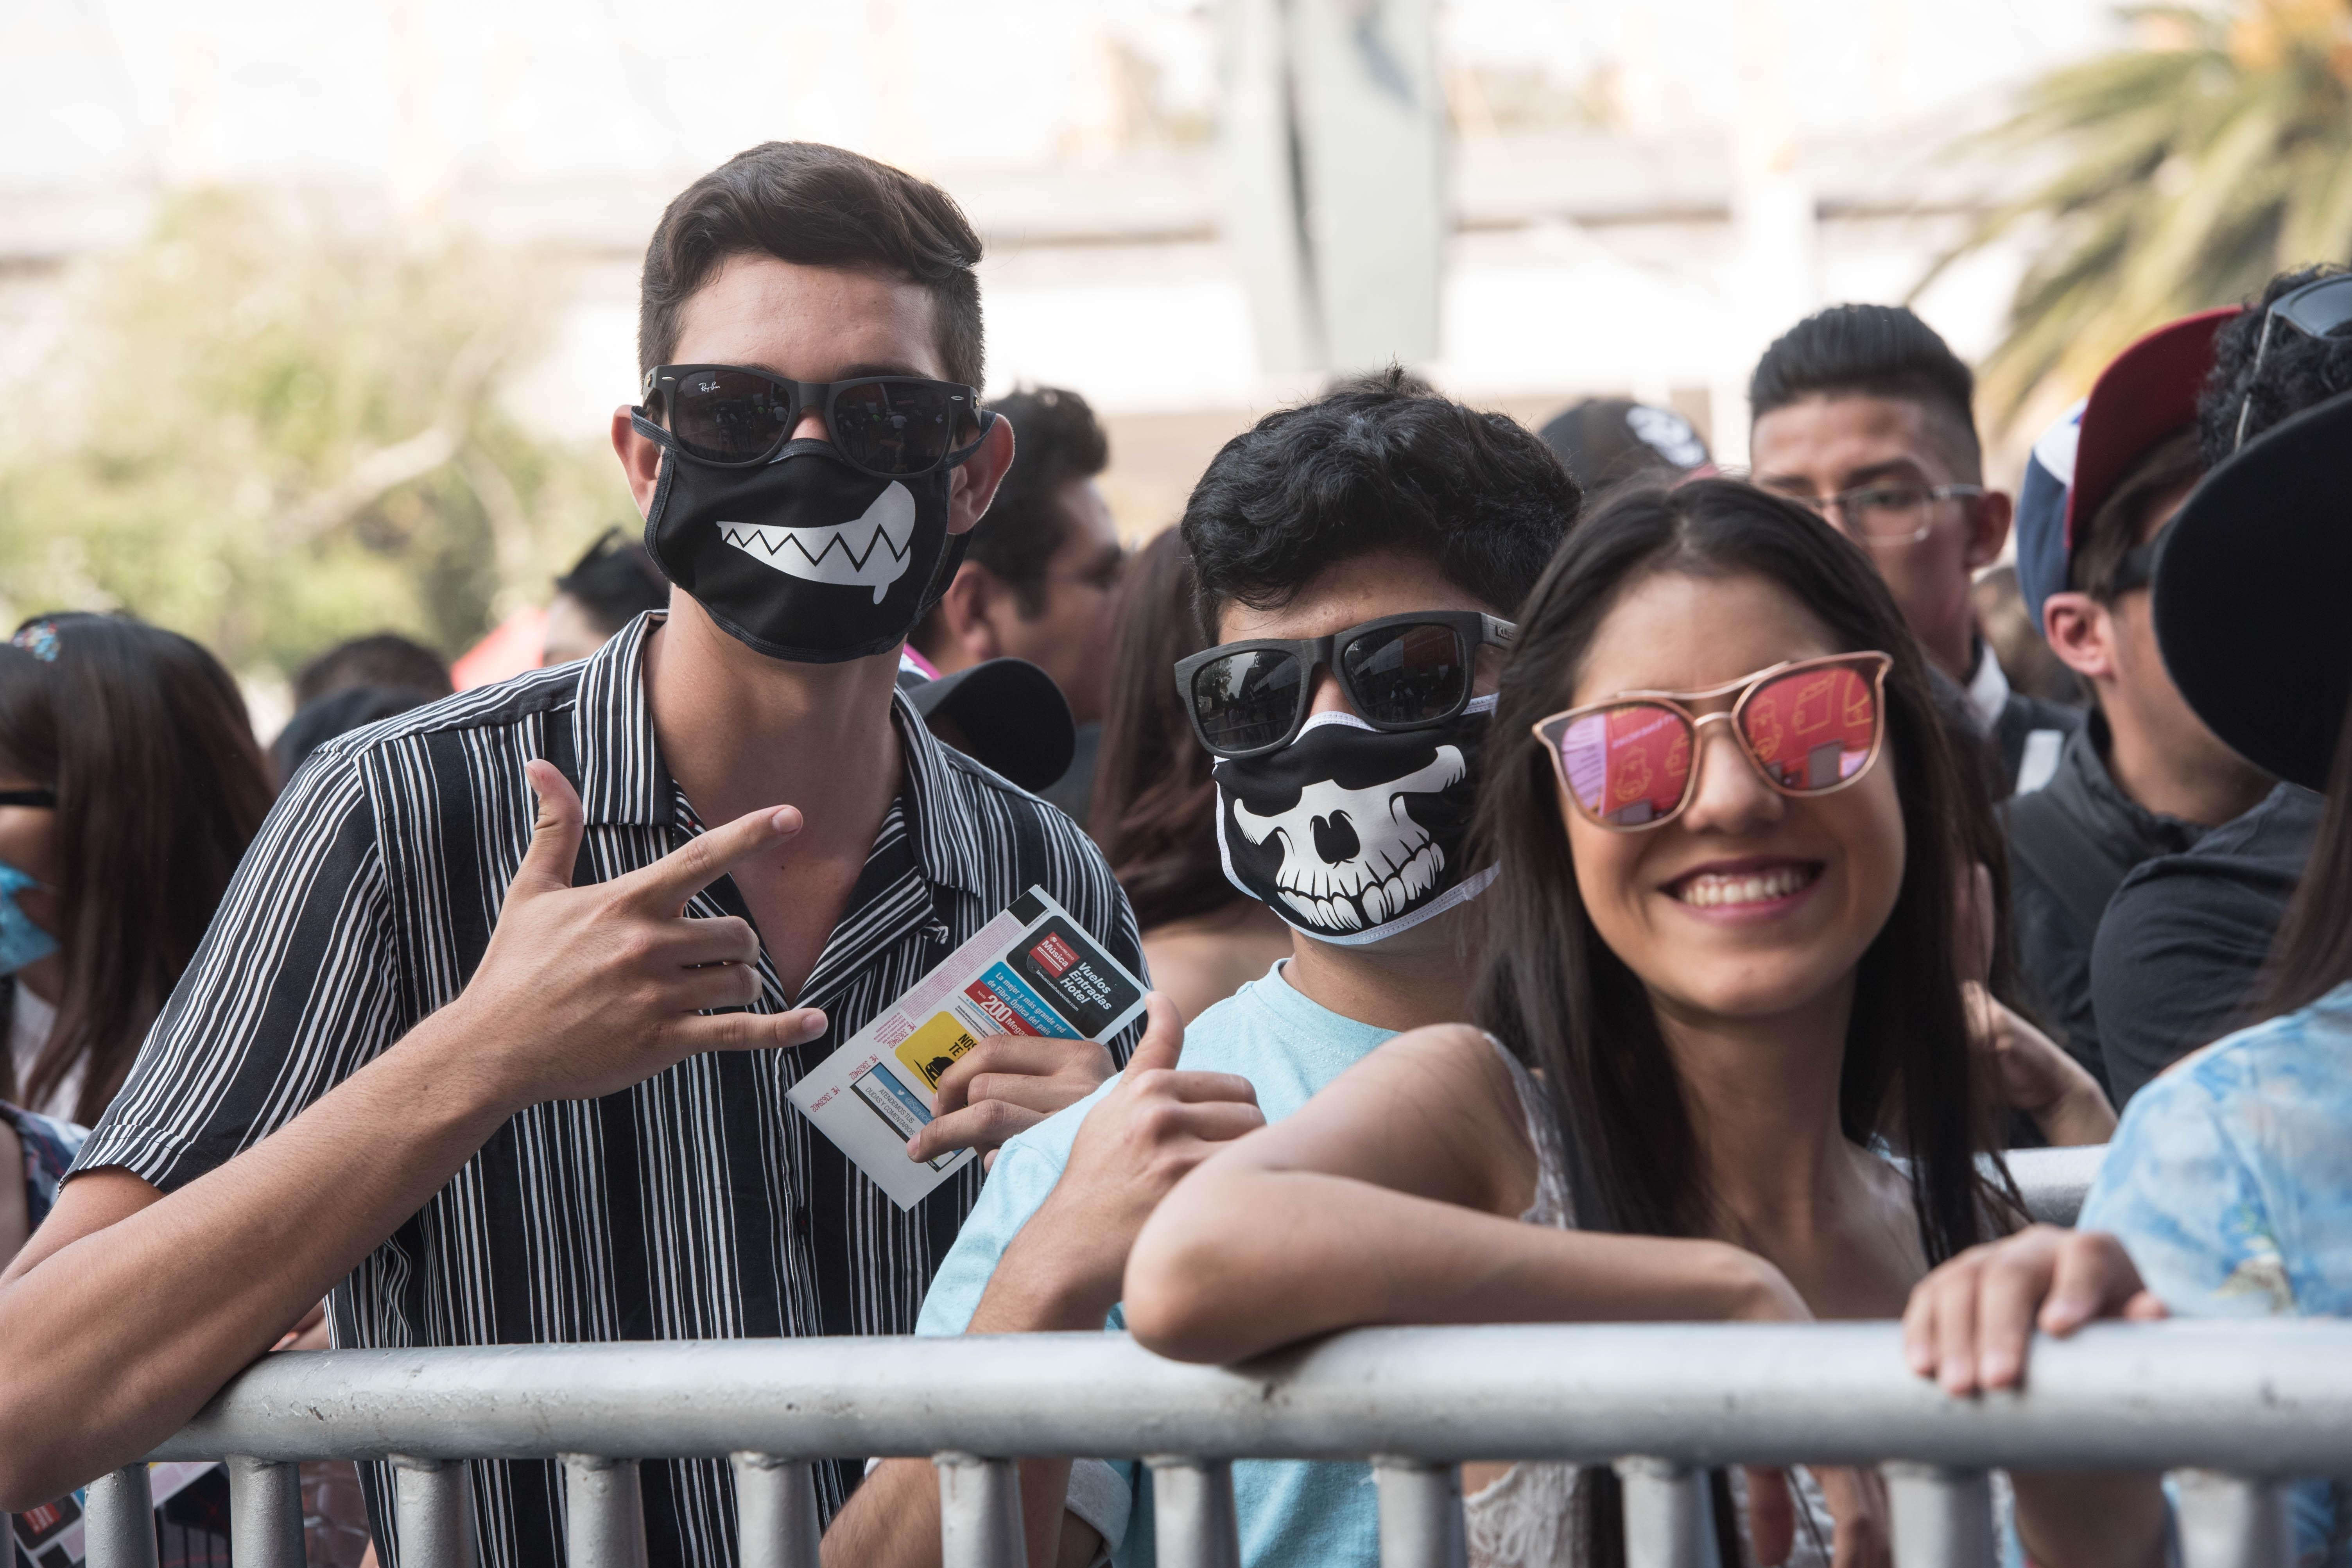 A crowd of concertgoers, some wearing face masks with skull imagery, outside on a sunny day